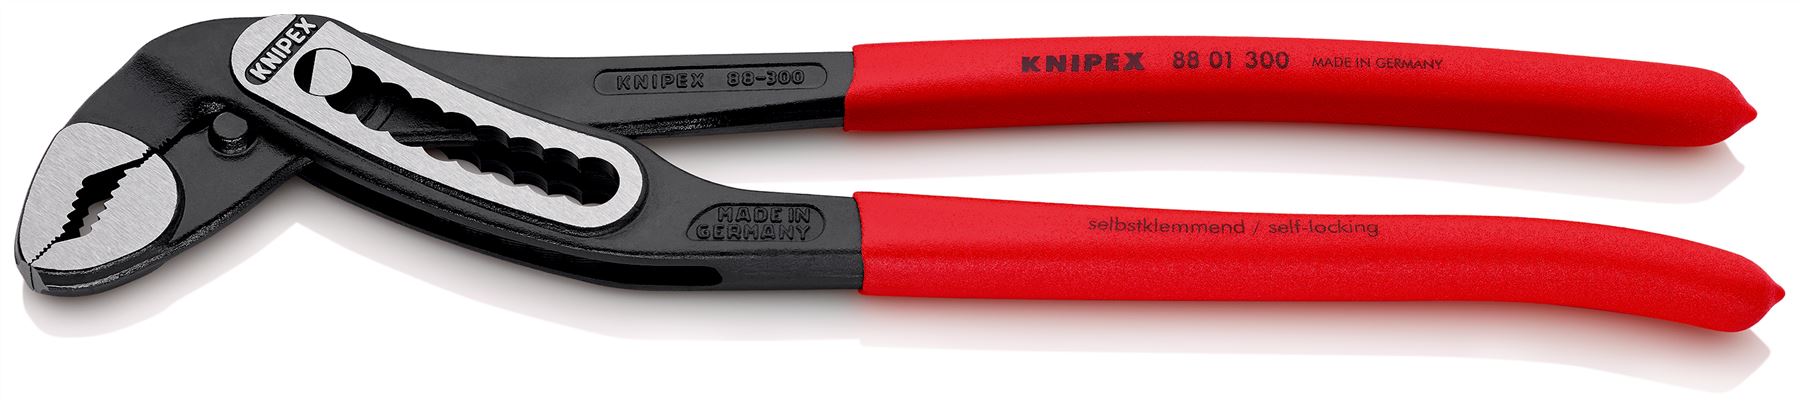 KNIPEX Alligator Water Pump Pliers 300mm Plastic Coated Handles Non Slip 88 01 300